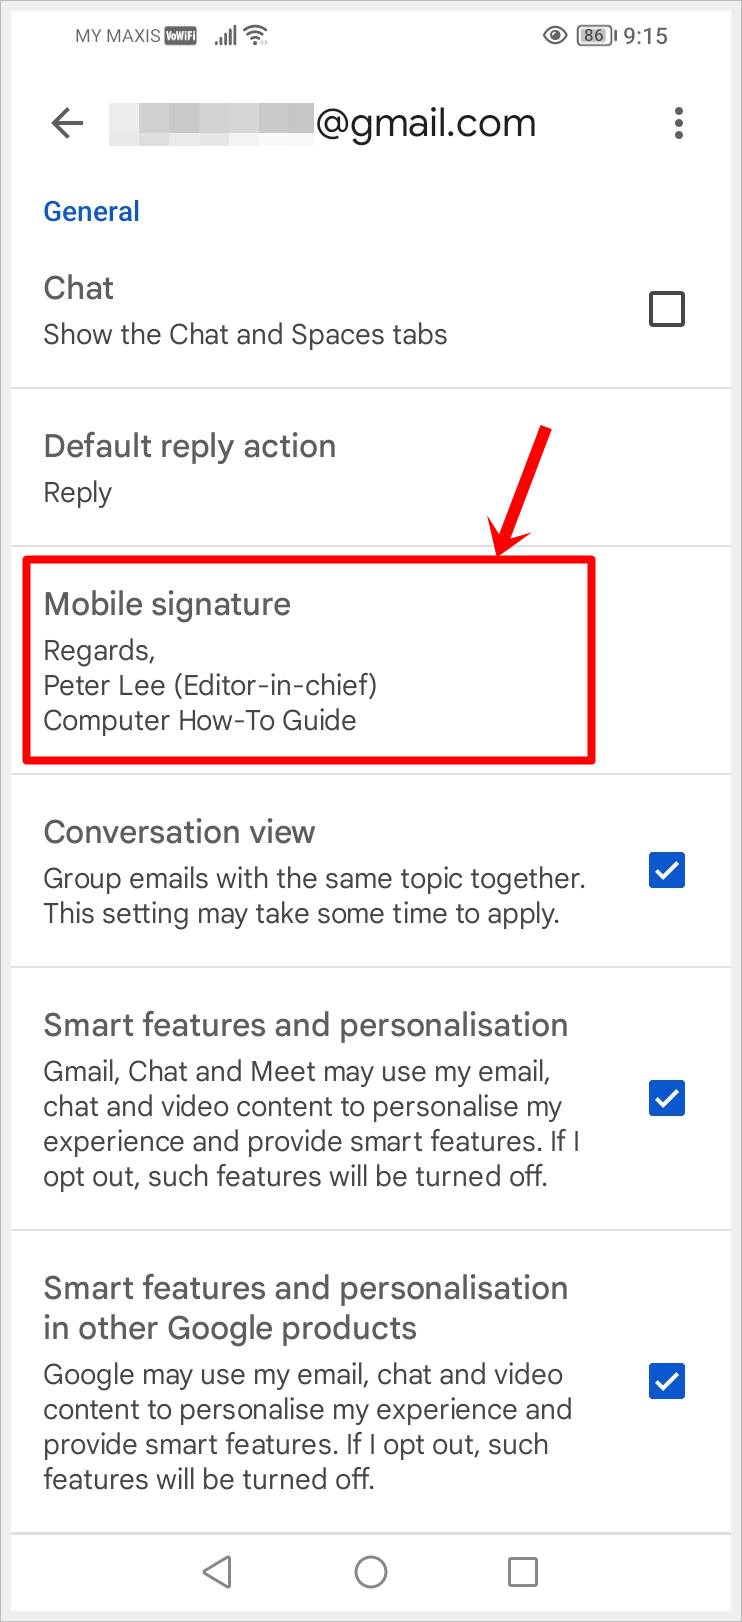 This image shows the selected Google account's 'General' page on an Android phone. The 'Mobile signature' option is highlighted.